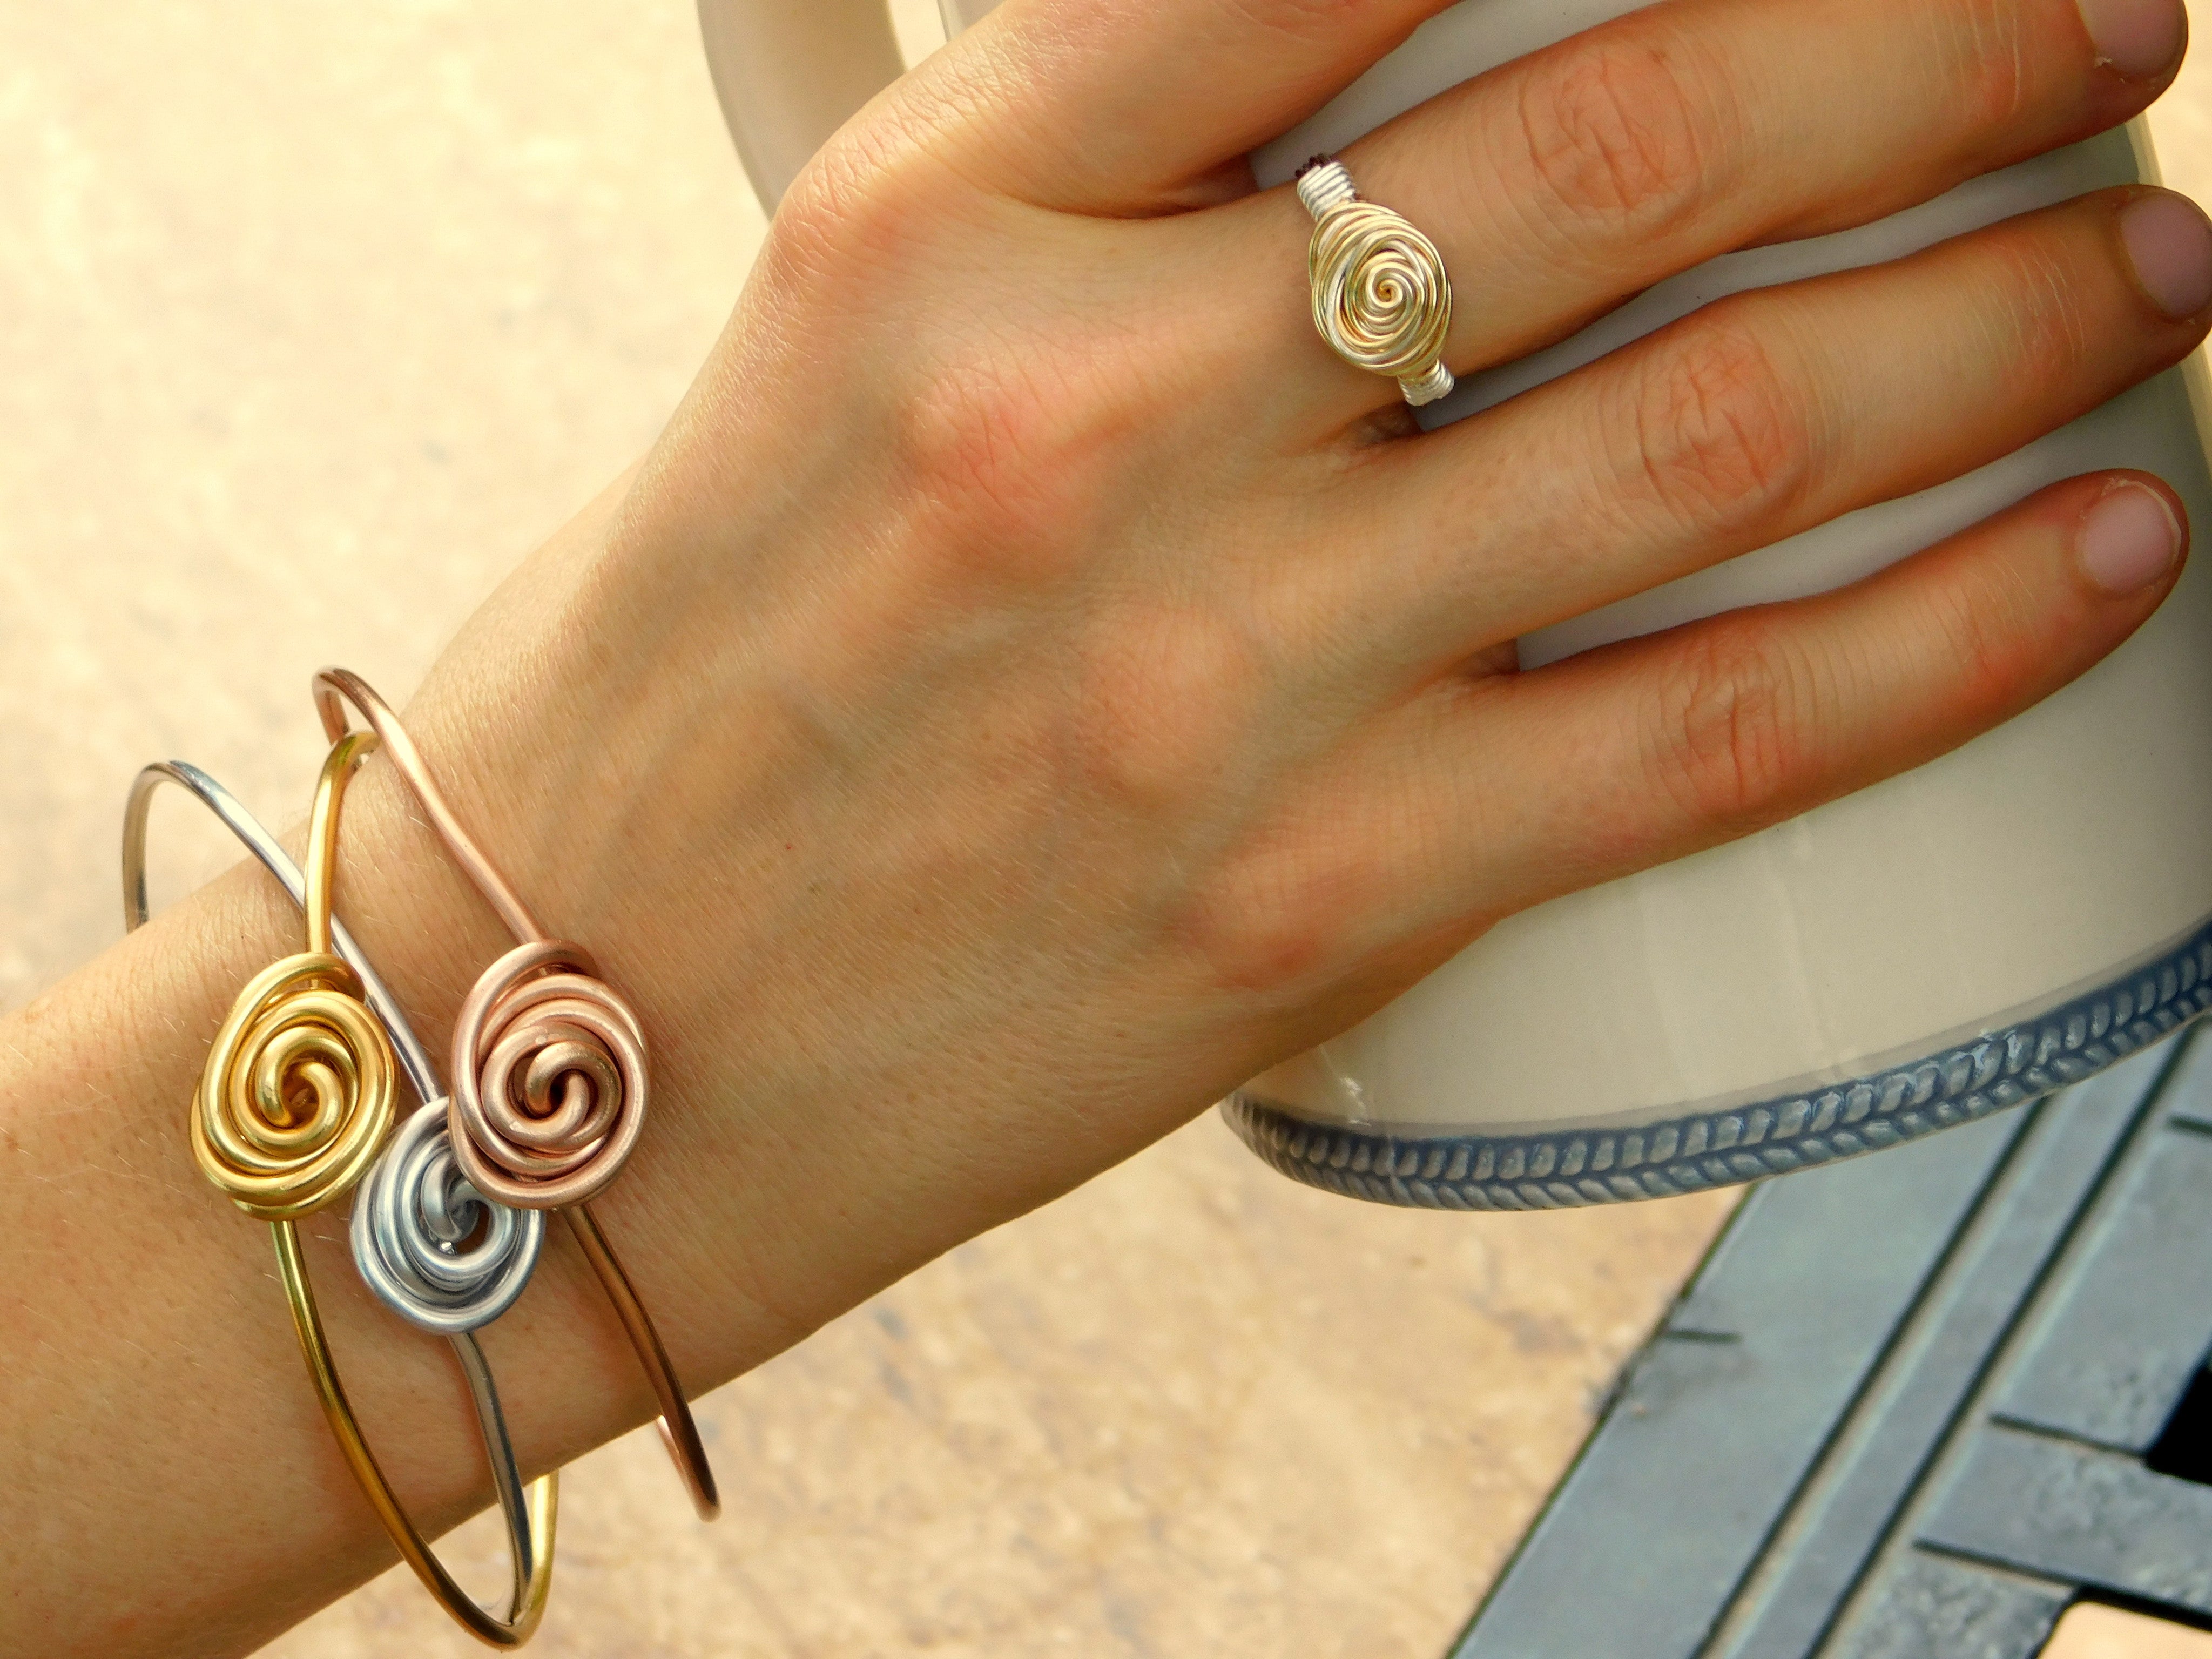 Stackable Rosette Bangle Bracelet and Rosette Ring DIY Wire Wrapping Kit